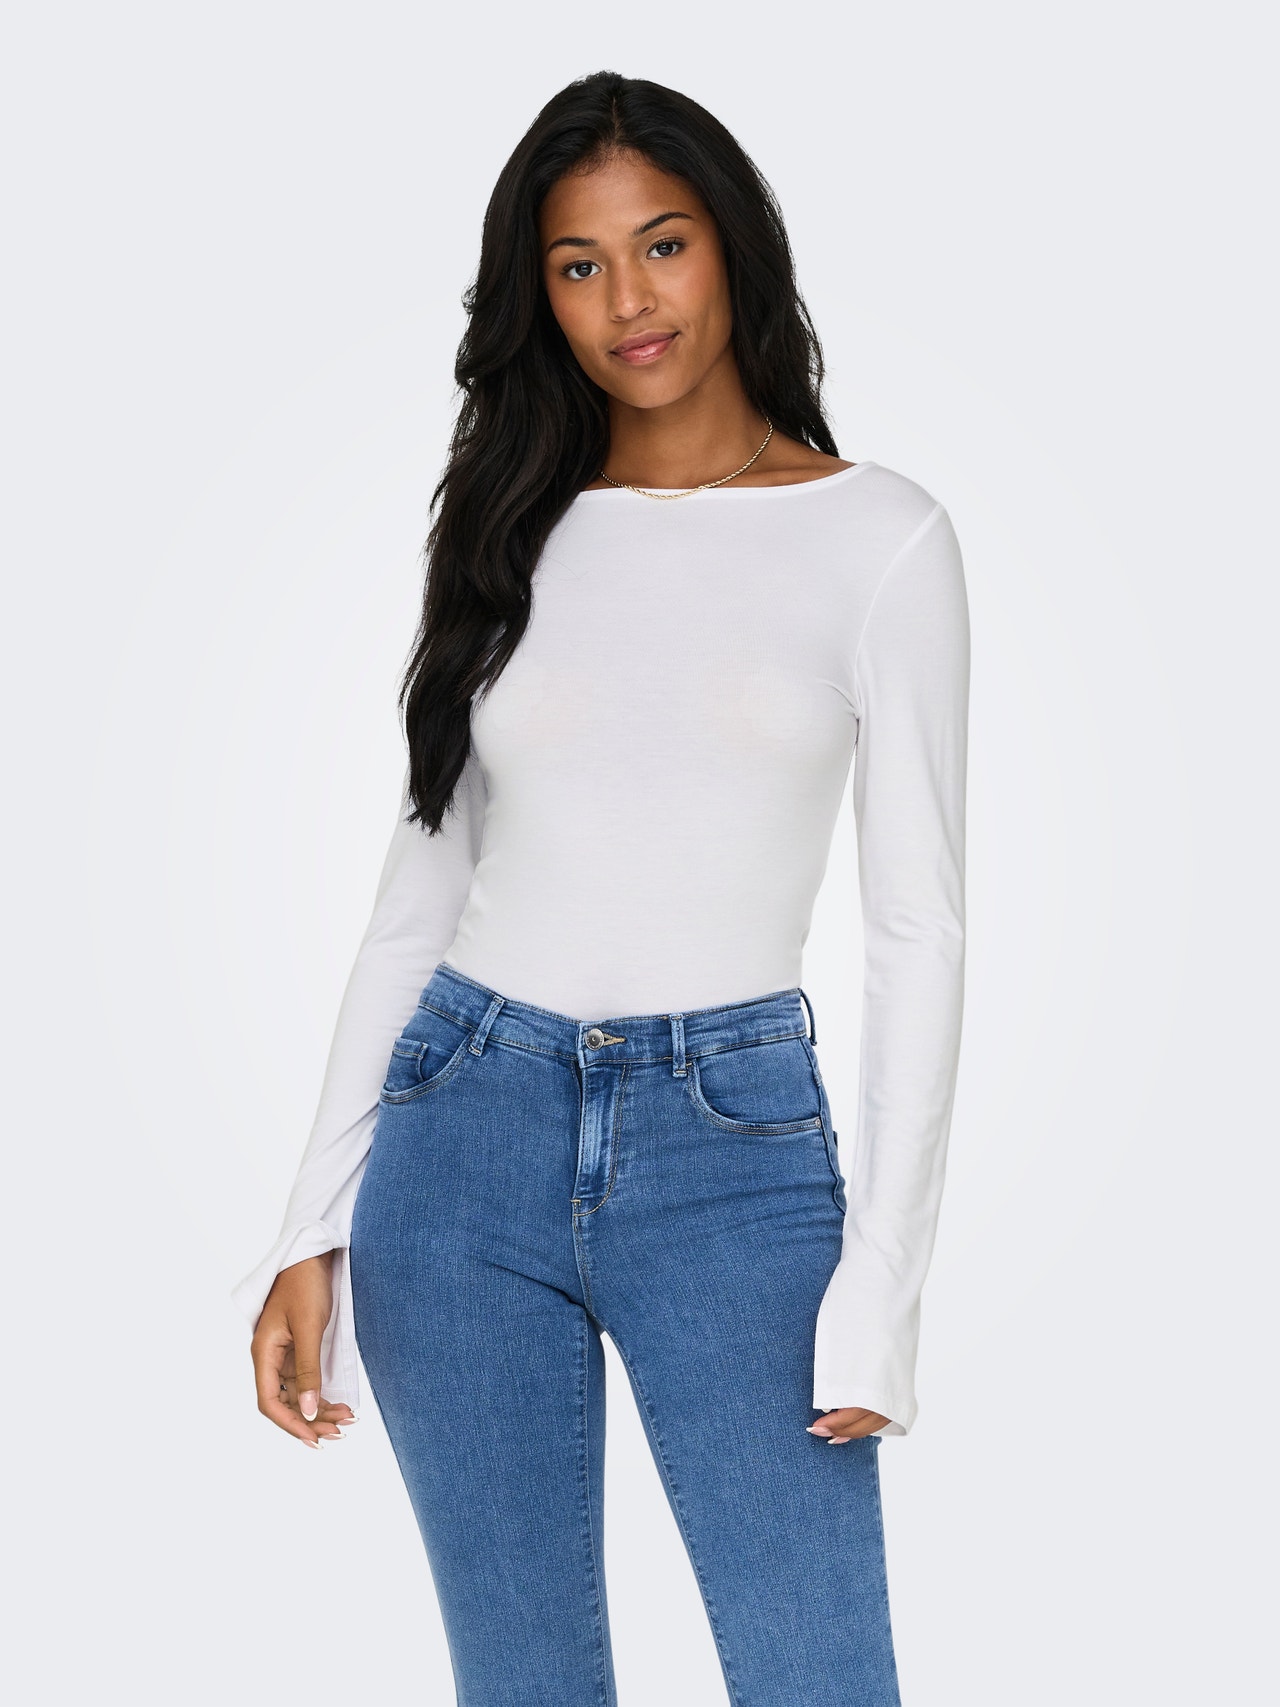 ONLY Regular Fit Boat neck Top -White - 15336321